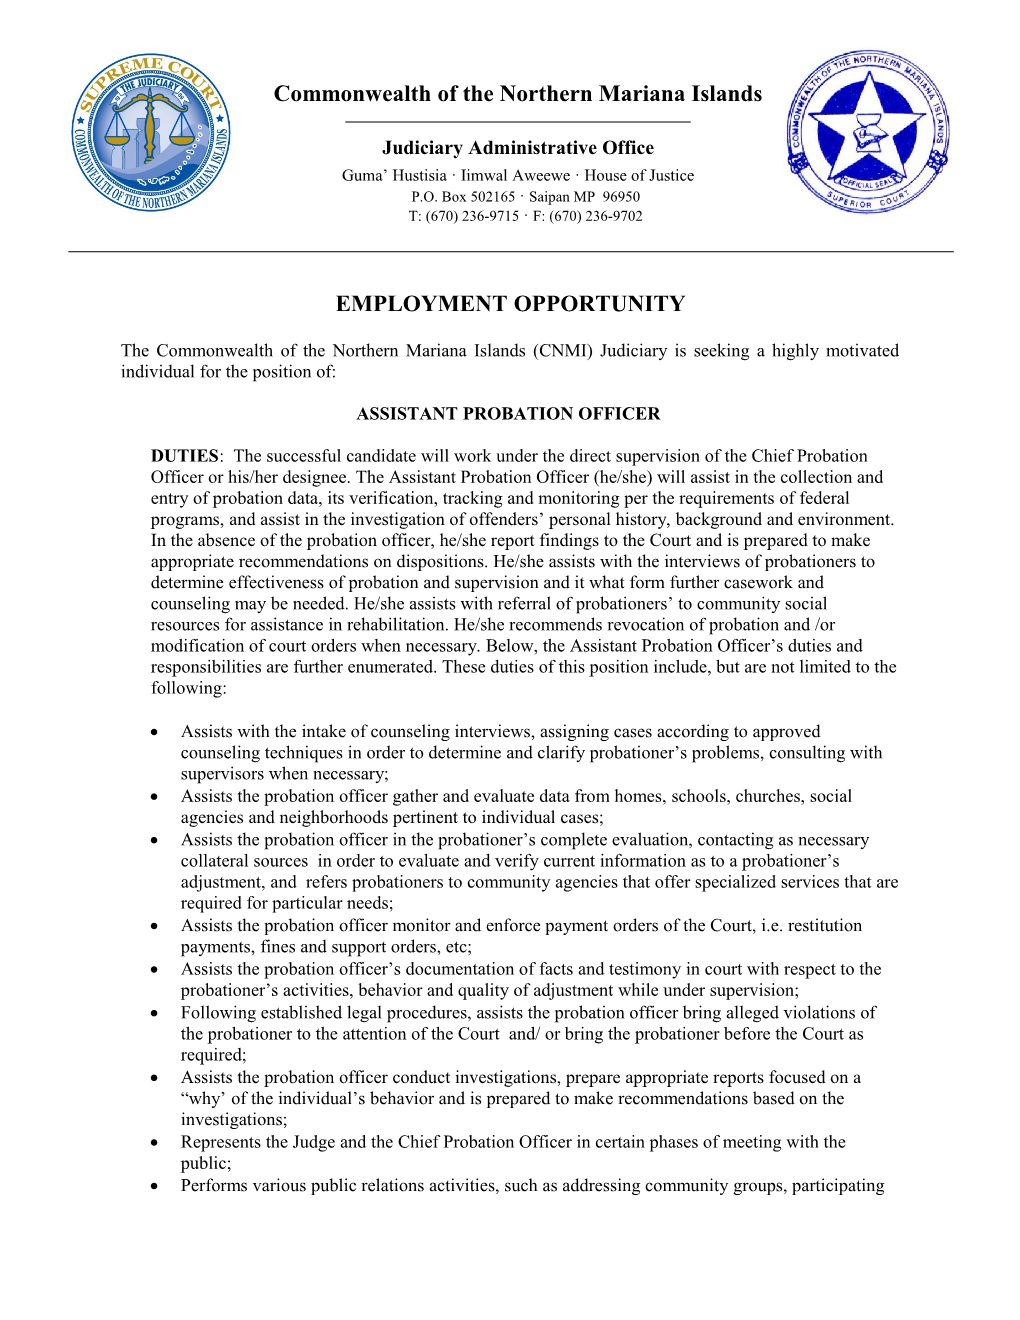 Employment Opportunity s2